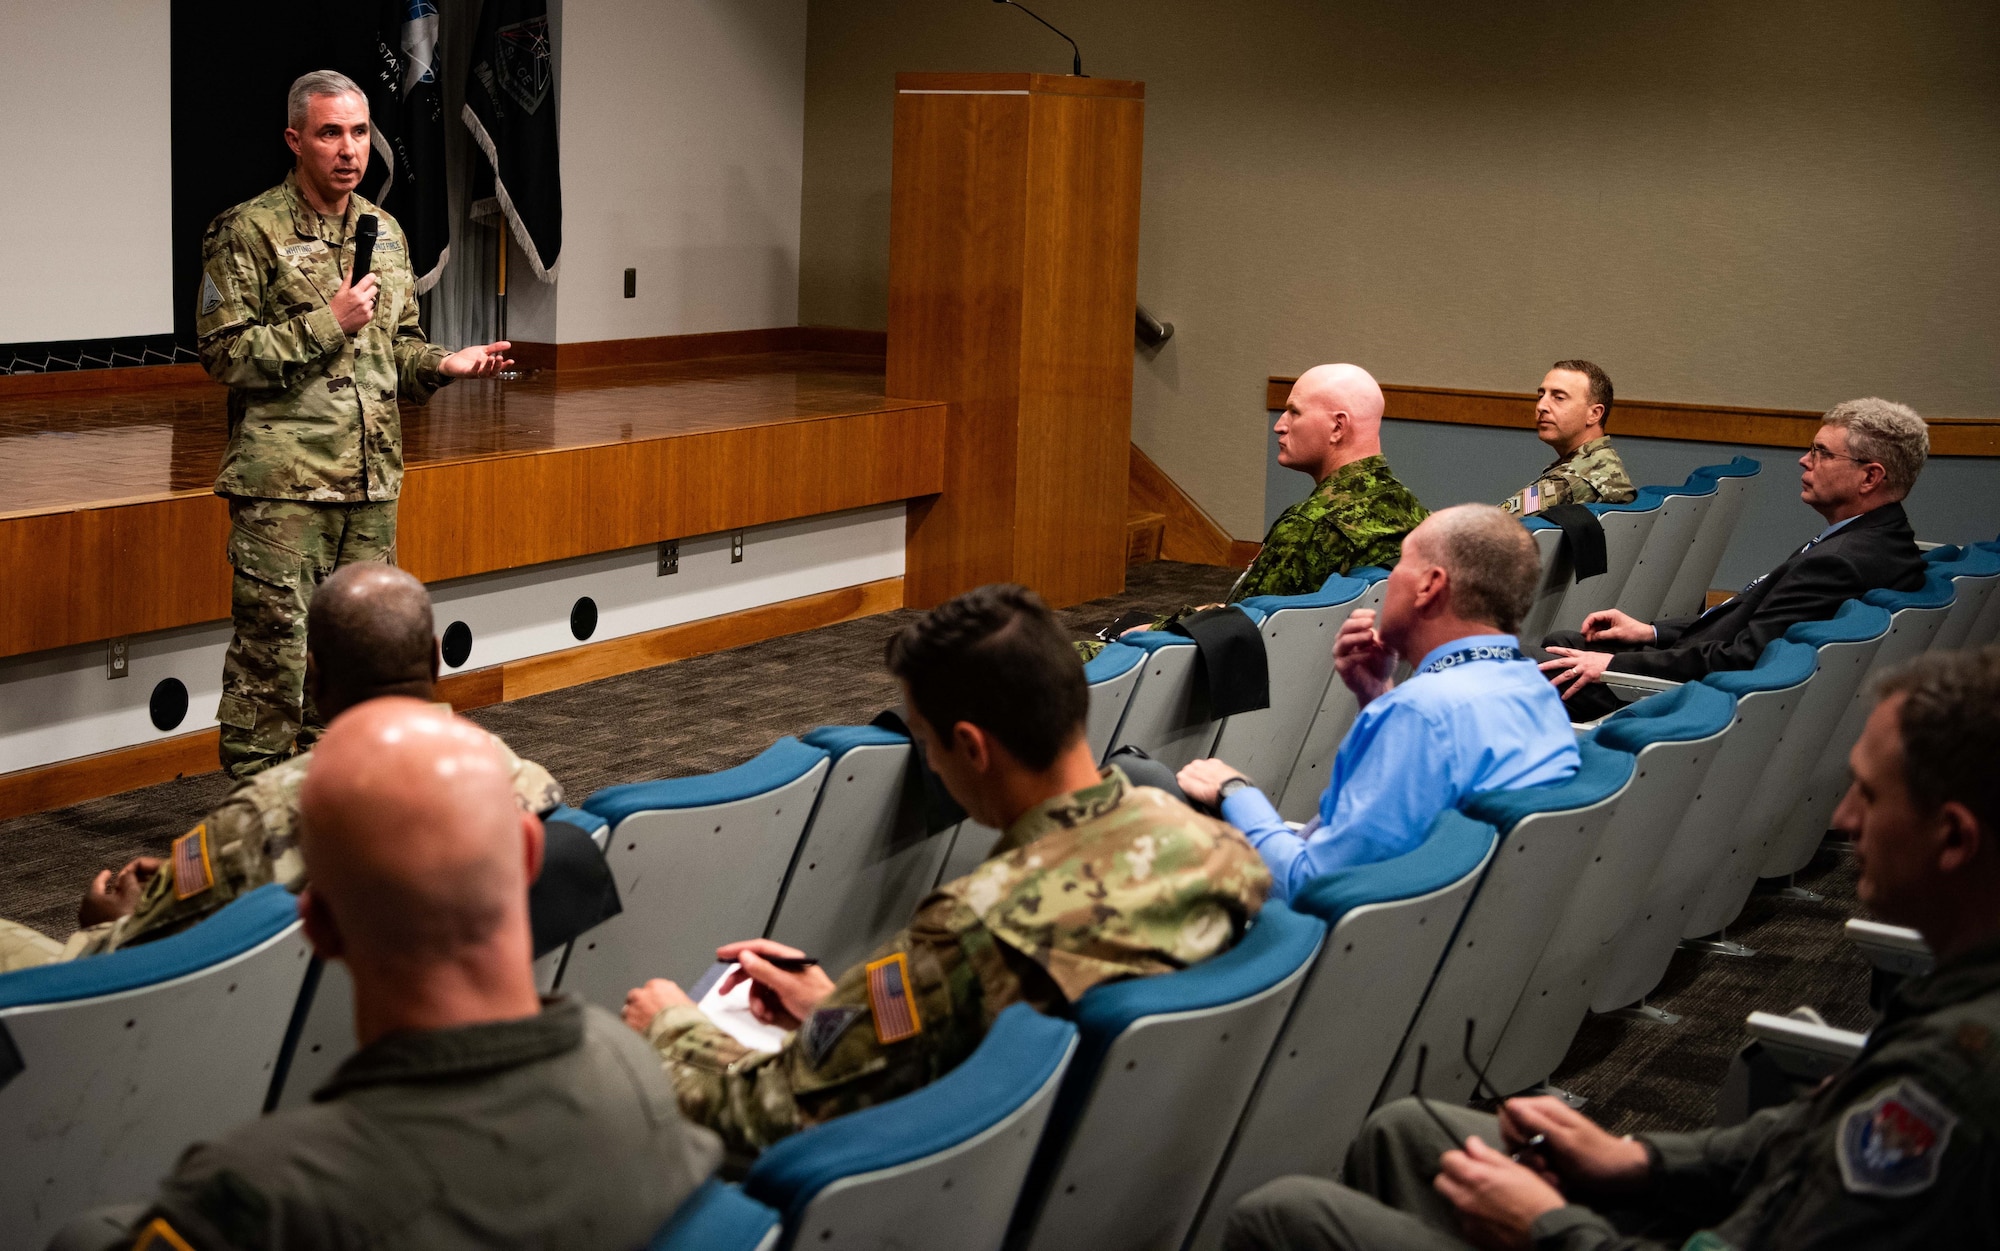 Lt Gen Stephen N. Whiting delivered opening comments during the Missile Community Cancer Study town hall. SpOC’s leadership team is committed to keeping uniformed and nonuniformed Guardians and Airmen informed on this important issue. Their health and well-being is paramount.